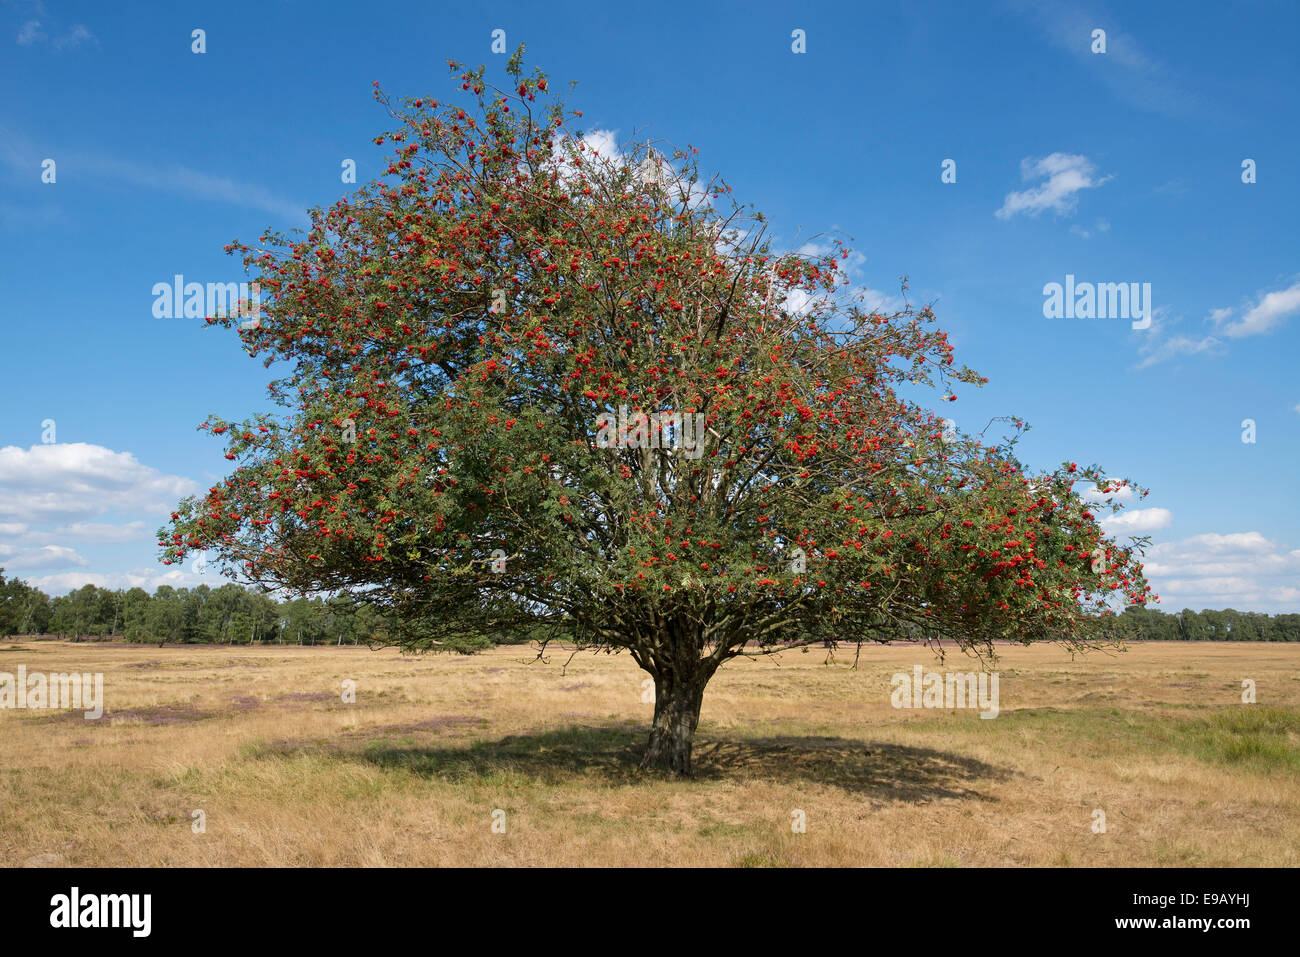 Mountain Ash or Rowan (Sorbus aucuparia) with red fruits, Schneverdingen, Lower Saxony, Germany Stock Photo